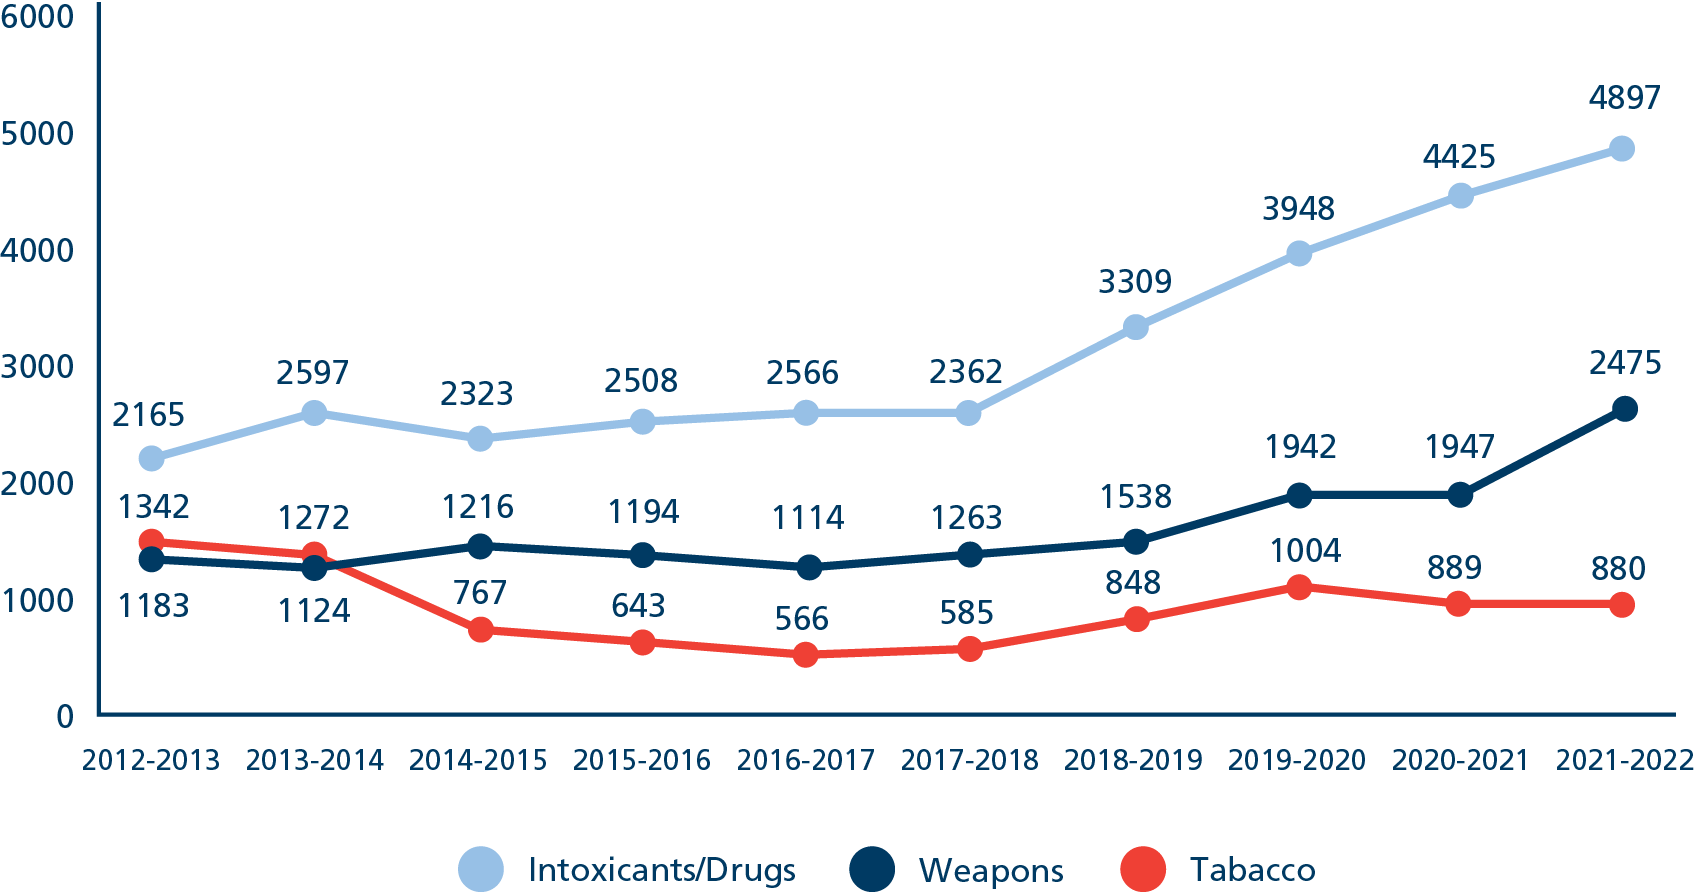 A line graph depicting total contraband seized by type and year. Intoxicants/Drugs, 2012-2013 = 2,165, 2013-2014 = 2,597, 2014-2015 = 2,323, 2015-2016 = 2,508, 2016-2017 = 2,566, 2017-2018 = 2,362, 2018-2019 = 3,309, 2019-2020 = 3,948, 2020-2021 = 4,425, 2021-2022 = 4,897. Weapons, 2012-2013 = 1,183, 2013-2014 = 1,124, 2014-2015 = 1,216,2015-2016 = 1,194, 2016-2017 = 1,114, 2017-2018 = 1,263, 2018-2019 = 1,538, 2019-2020 = 1,942, 2020-2021 = 1,947, 2021-2022 = 2,475. Tobacco, 2012-2013 = 1,342, 2013-2014 = 1,272, 2014-2015 = 767, 2015-2016 = 643, 2016-2017 = 566, 2017-2018 = 585, 2018-2019 = 848, 2019-2020 = 1,004, 2020-2021 = 889, 2021-2022 = 880